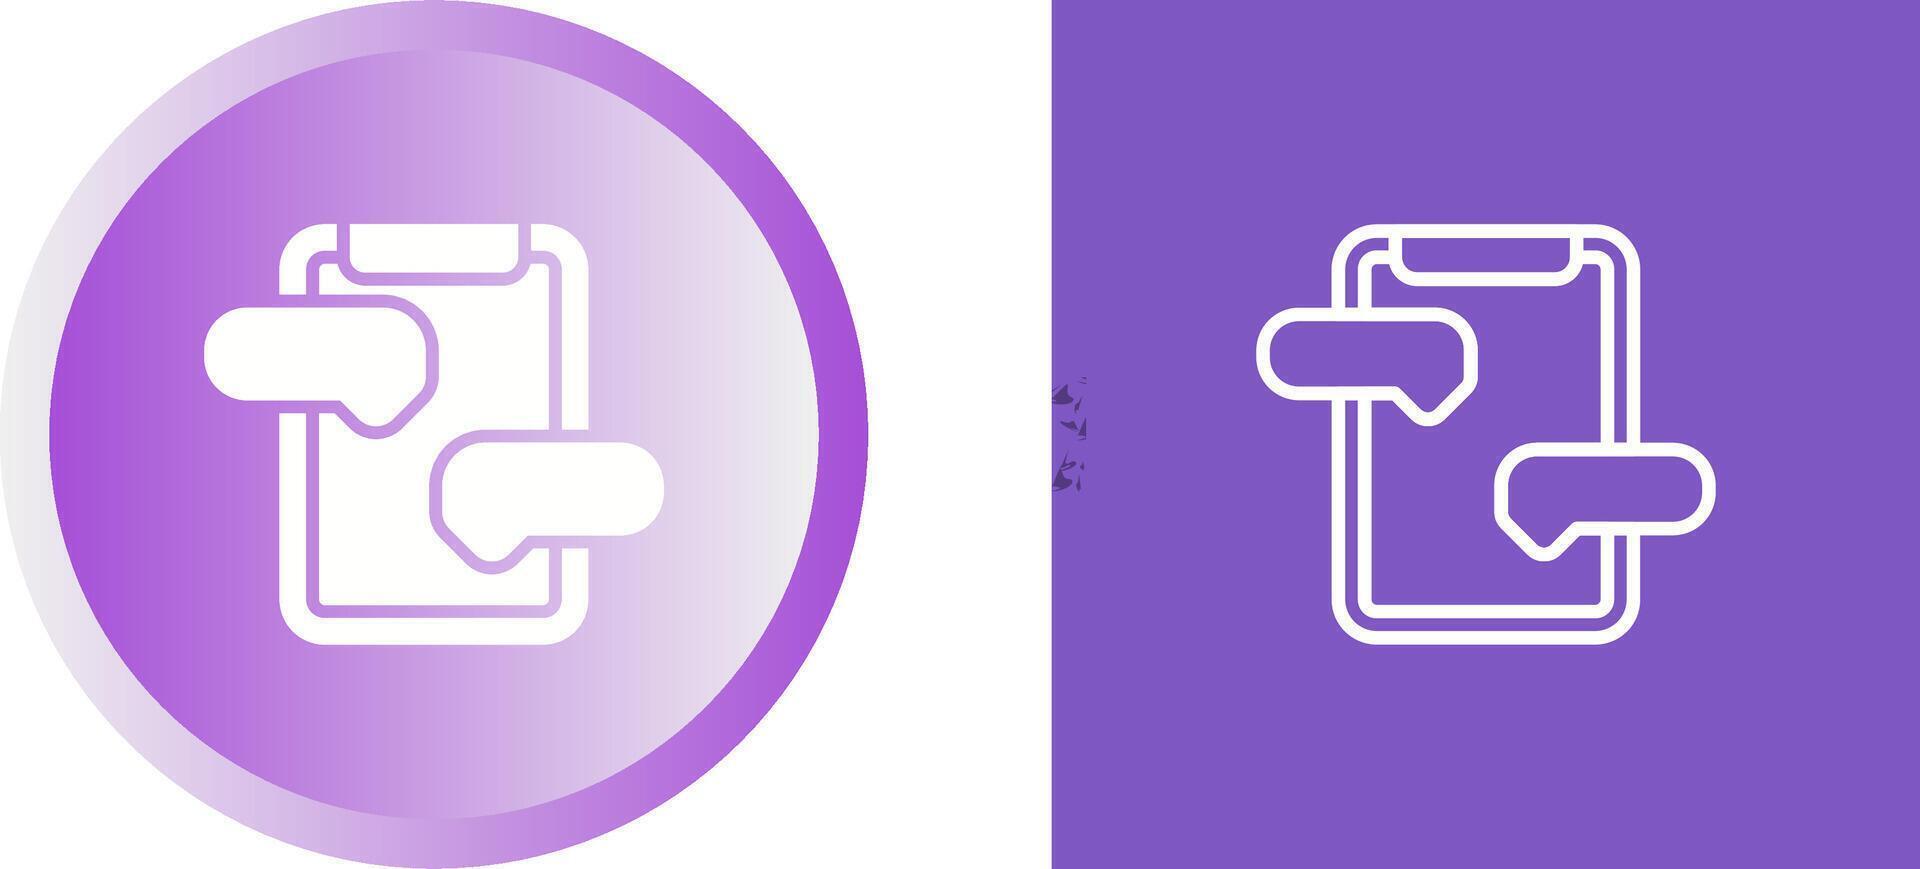 Messaging Services Vector Icon